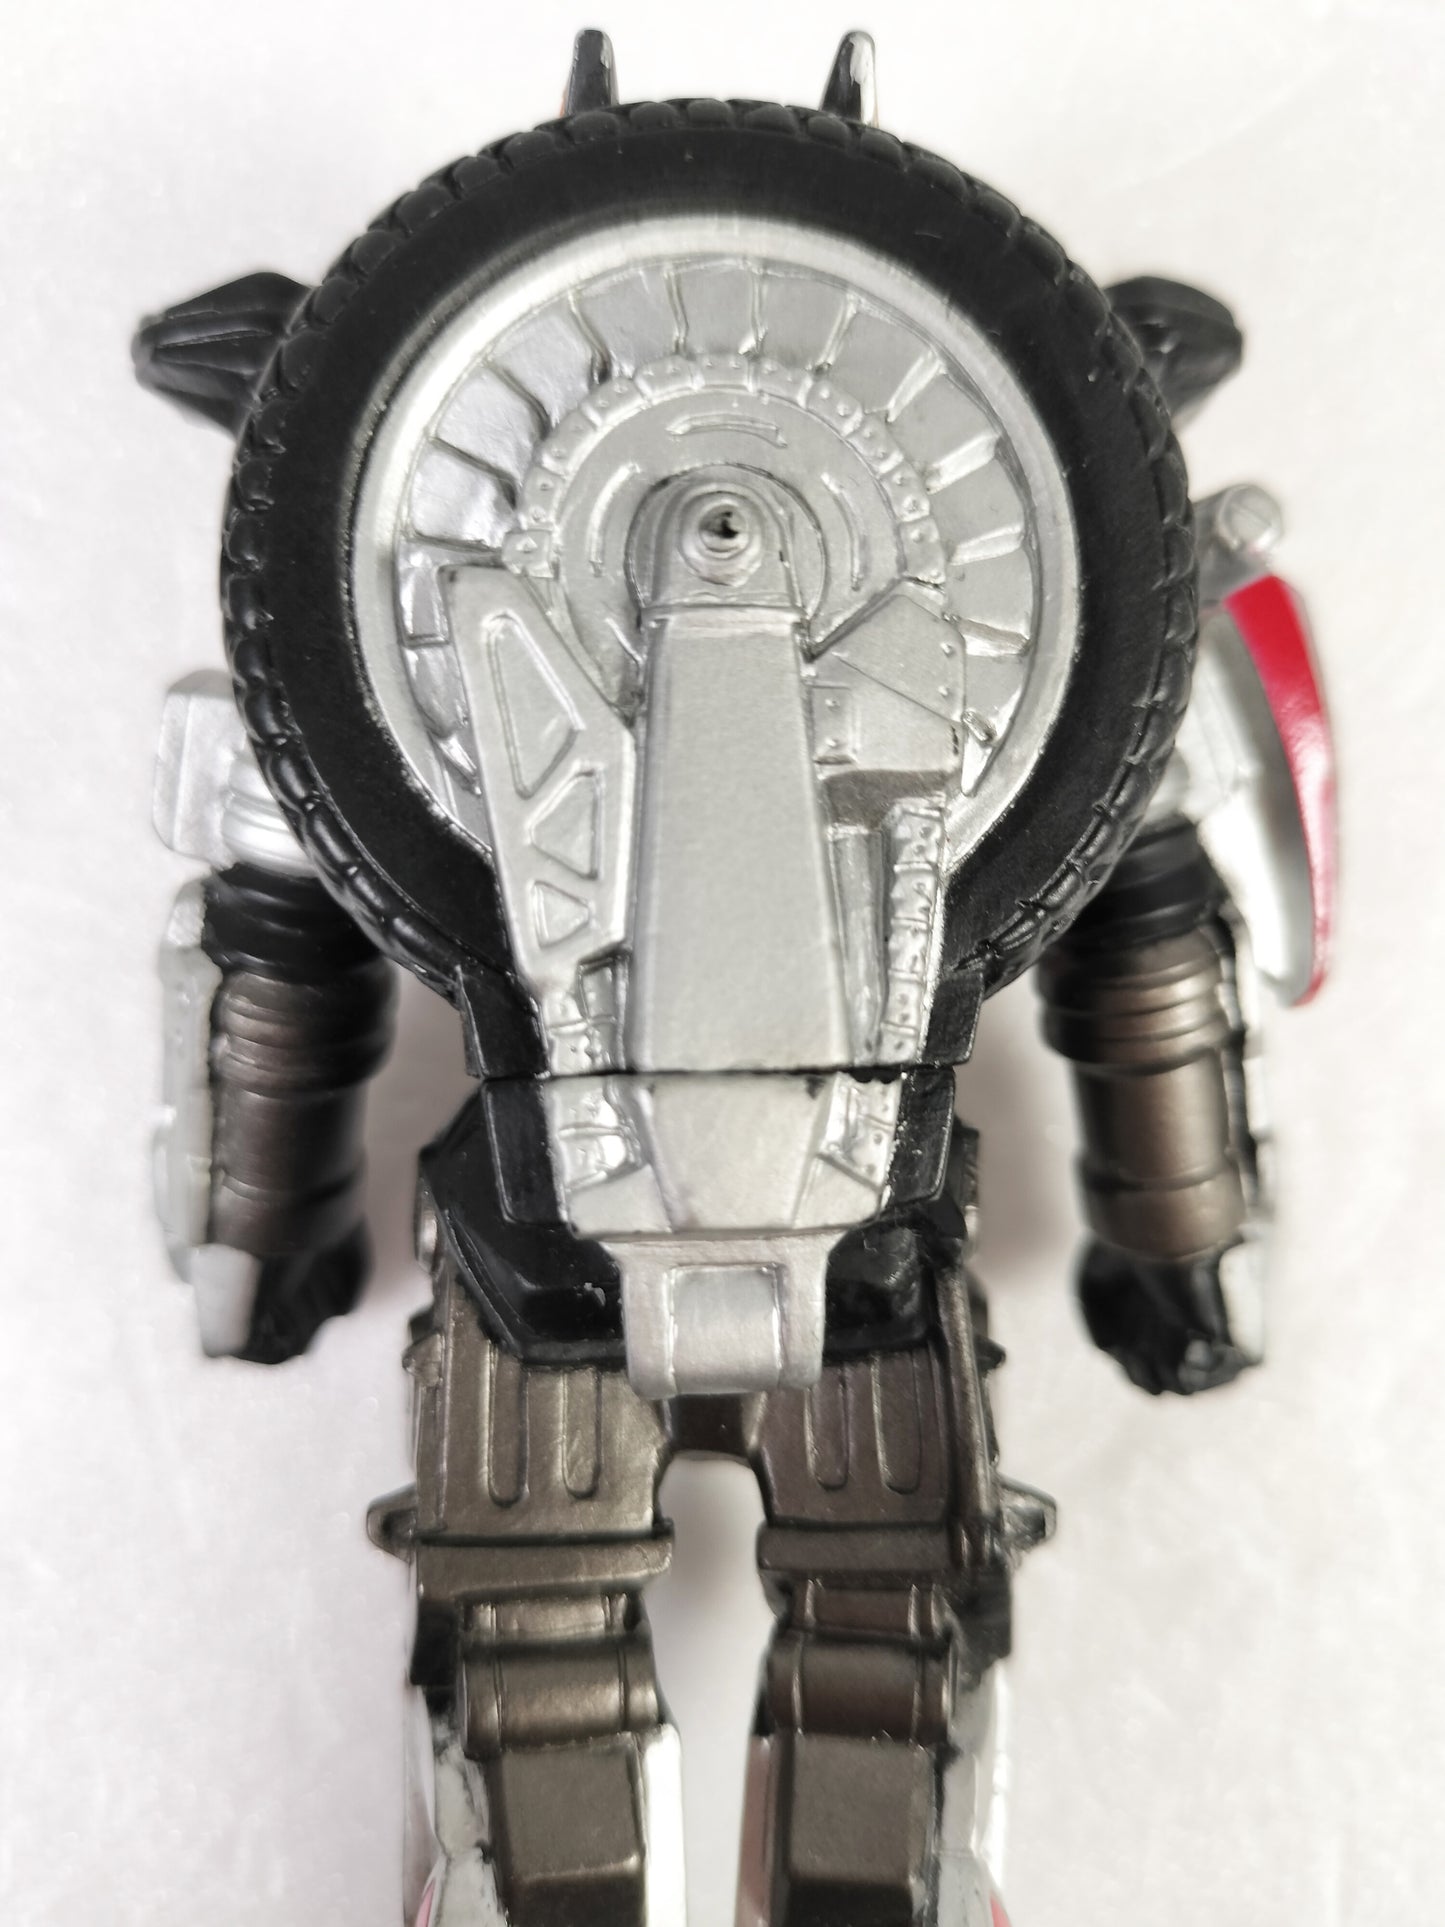 Kamen rider Autobajin (battle mode) Made in China Height about 12.5cm Manufactured in 2003 Sofvi Figure retro vintage major scratches and dirt